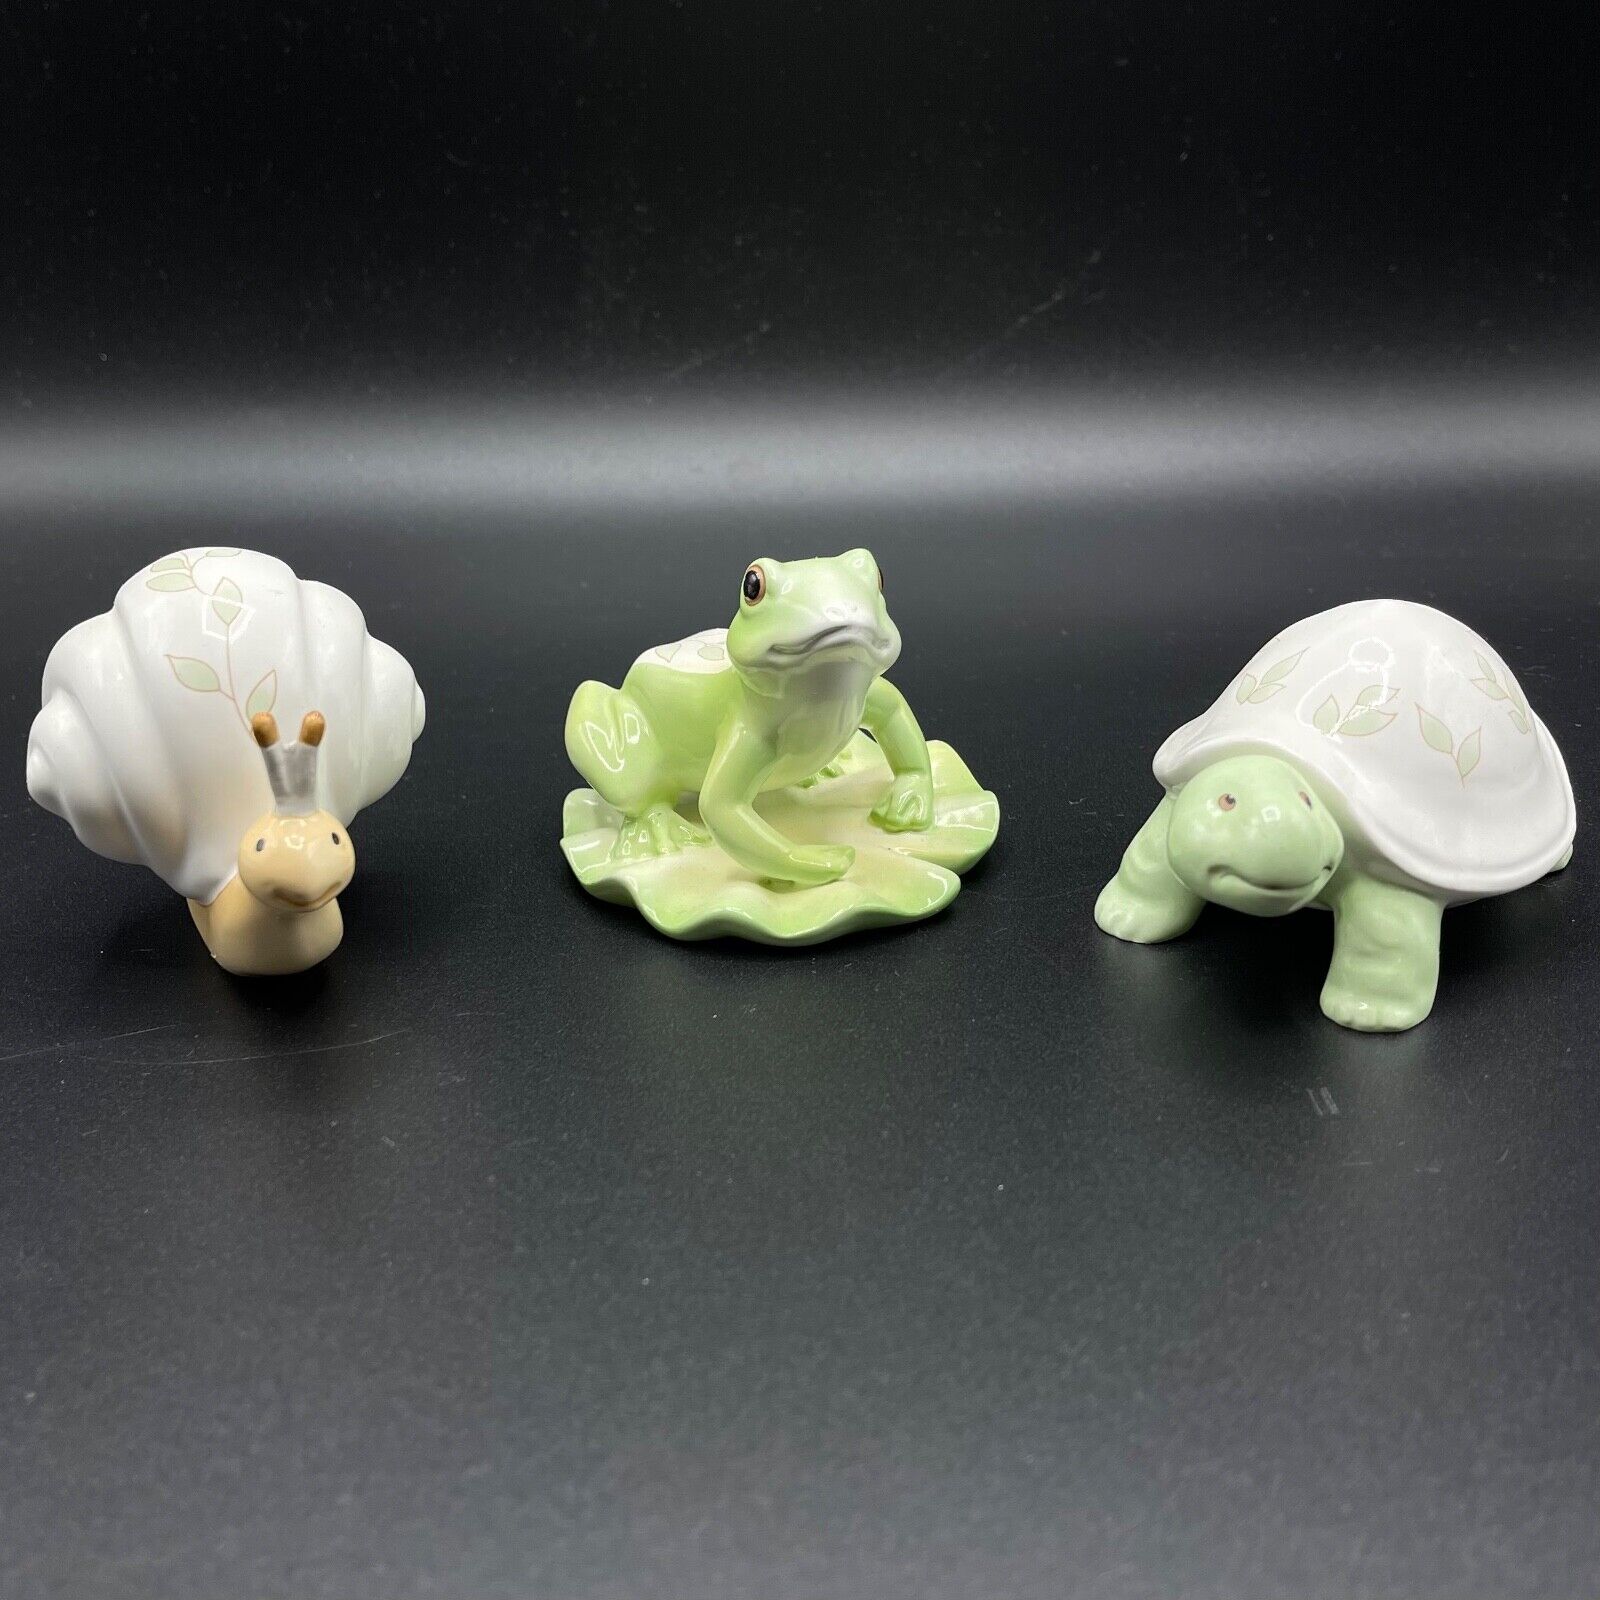 Lot of 3 Lenox Figurines- Snail, Turtle, And Frog-  All In Great Shape